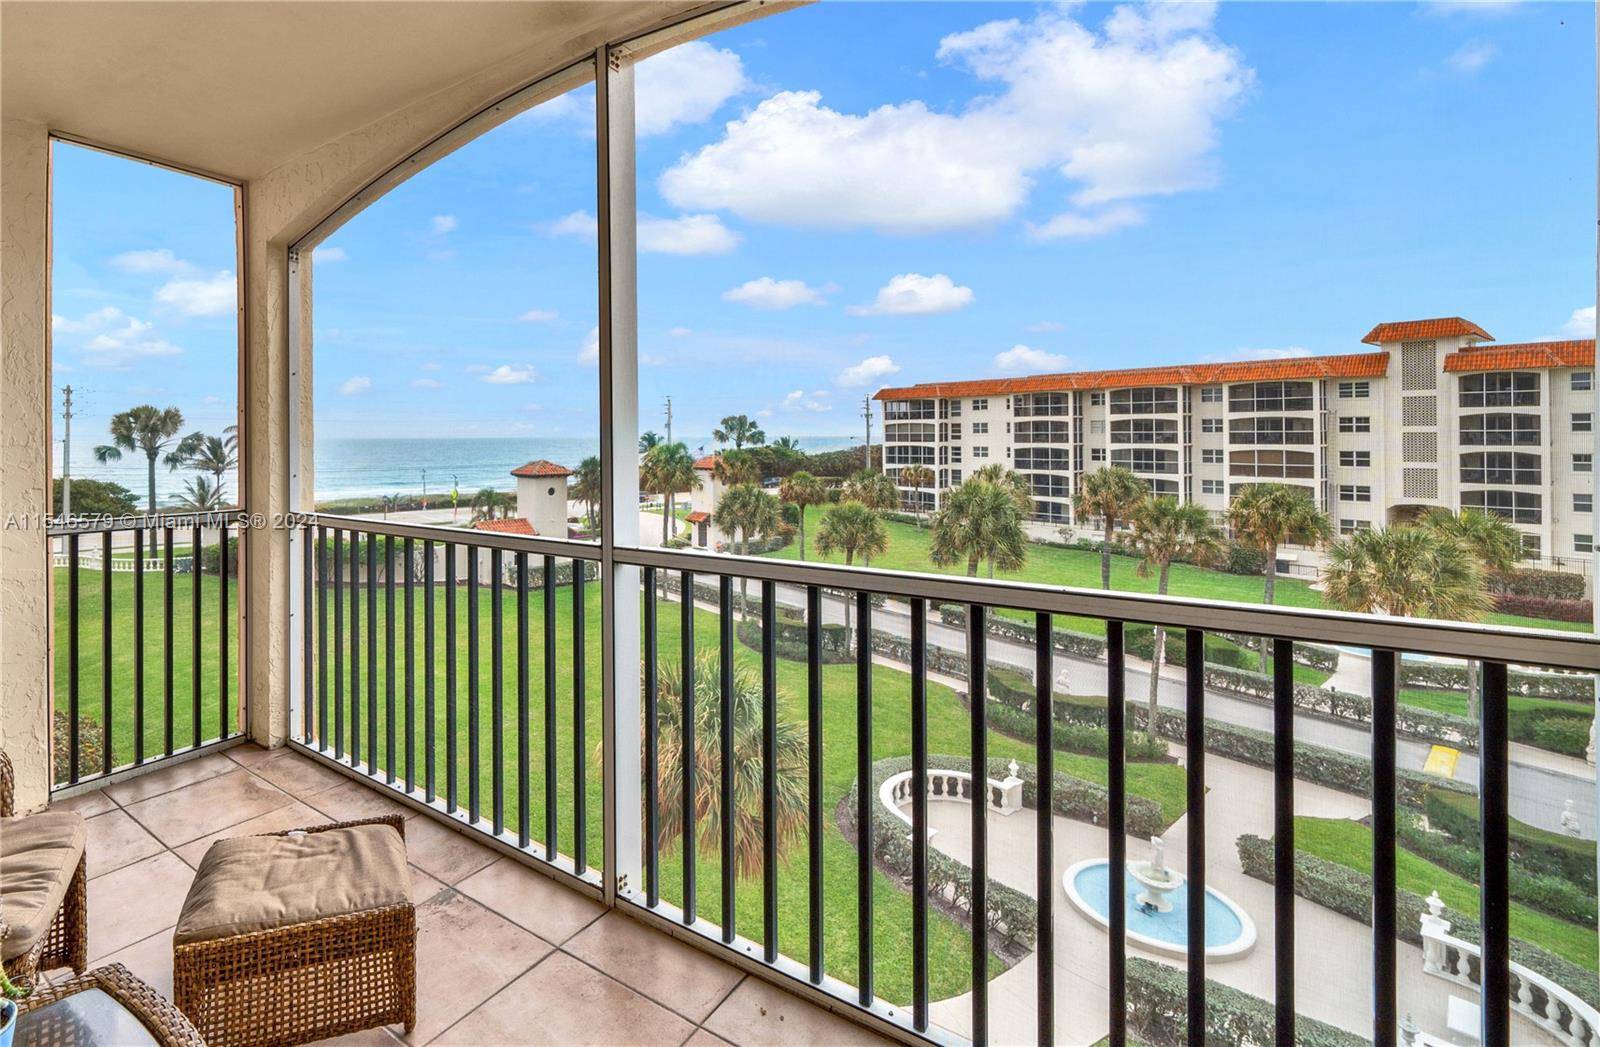 This renovated condo offers the epitome of coastal living with its stunning ocean view.